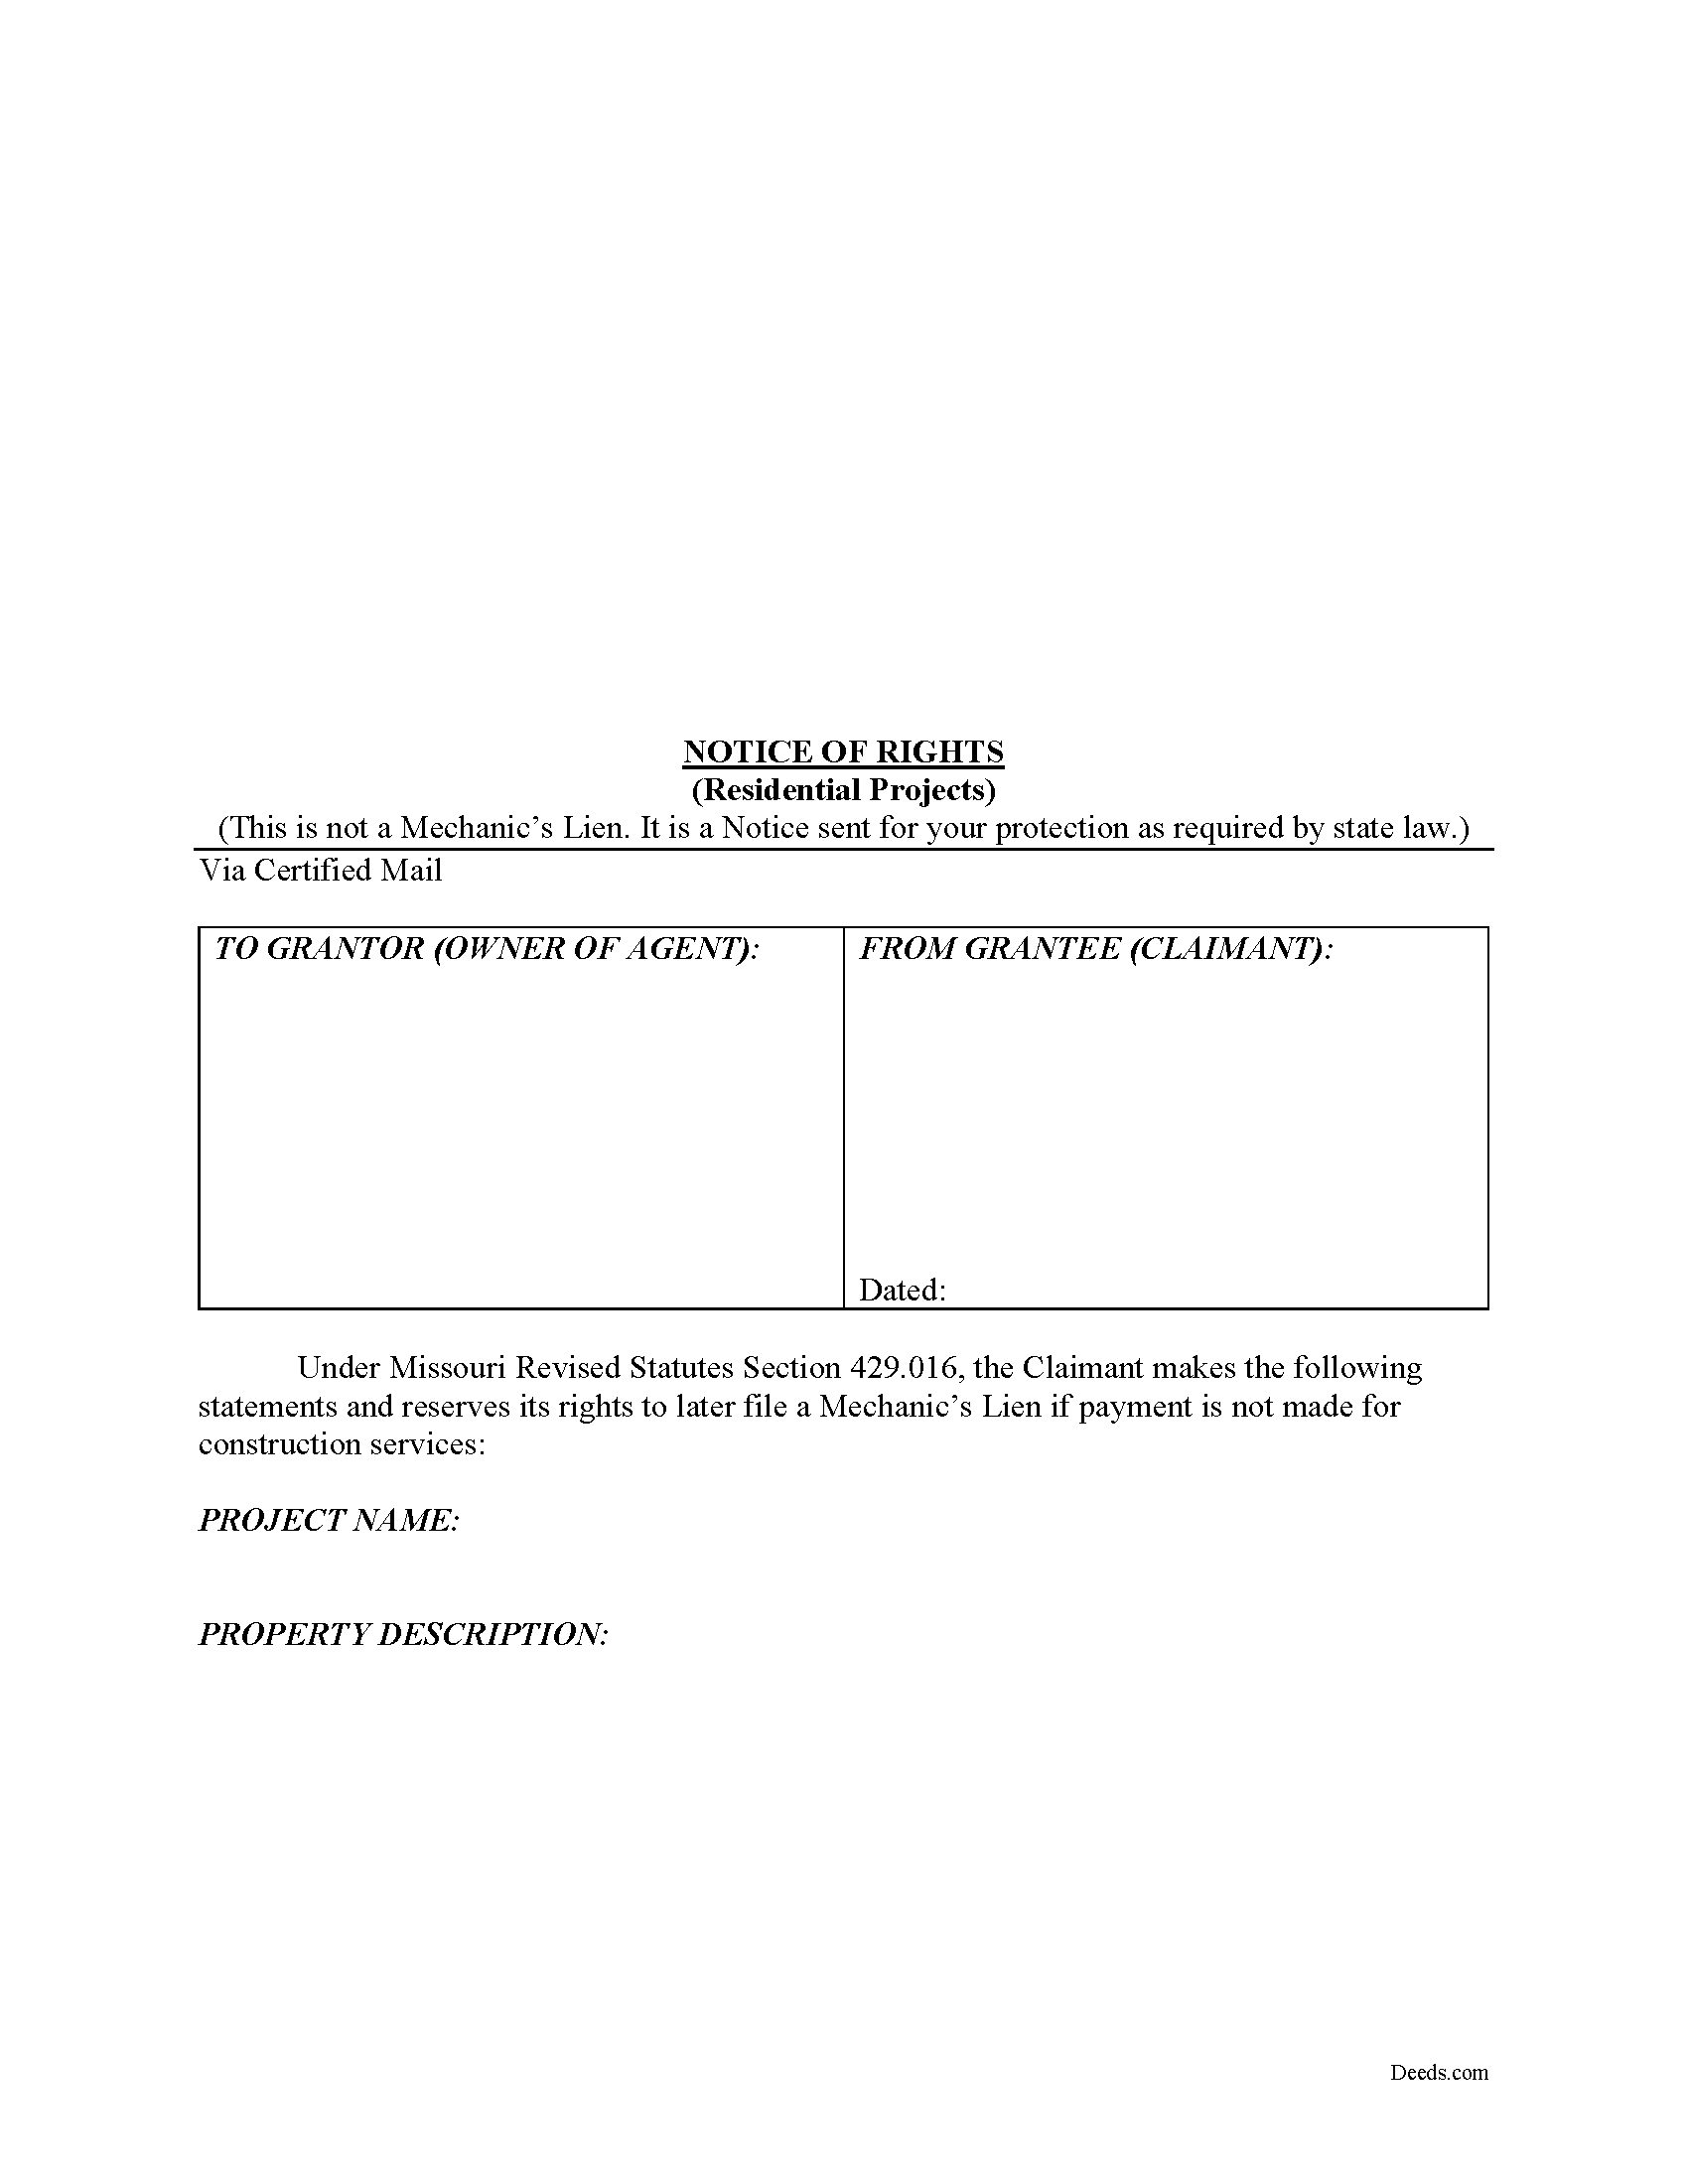 Notice of Rights Form